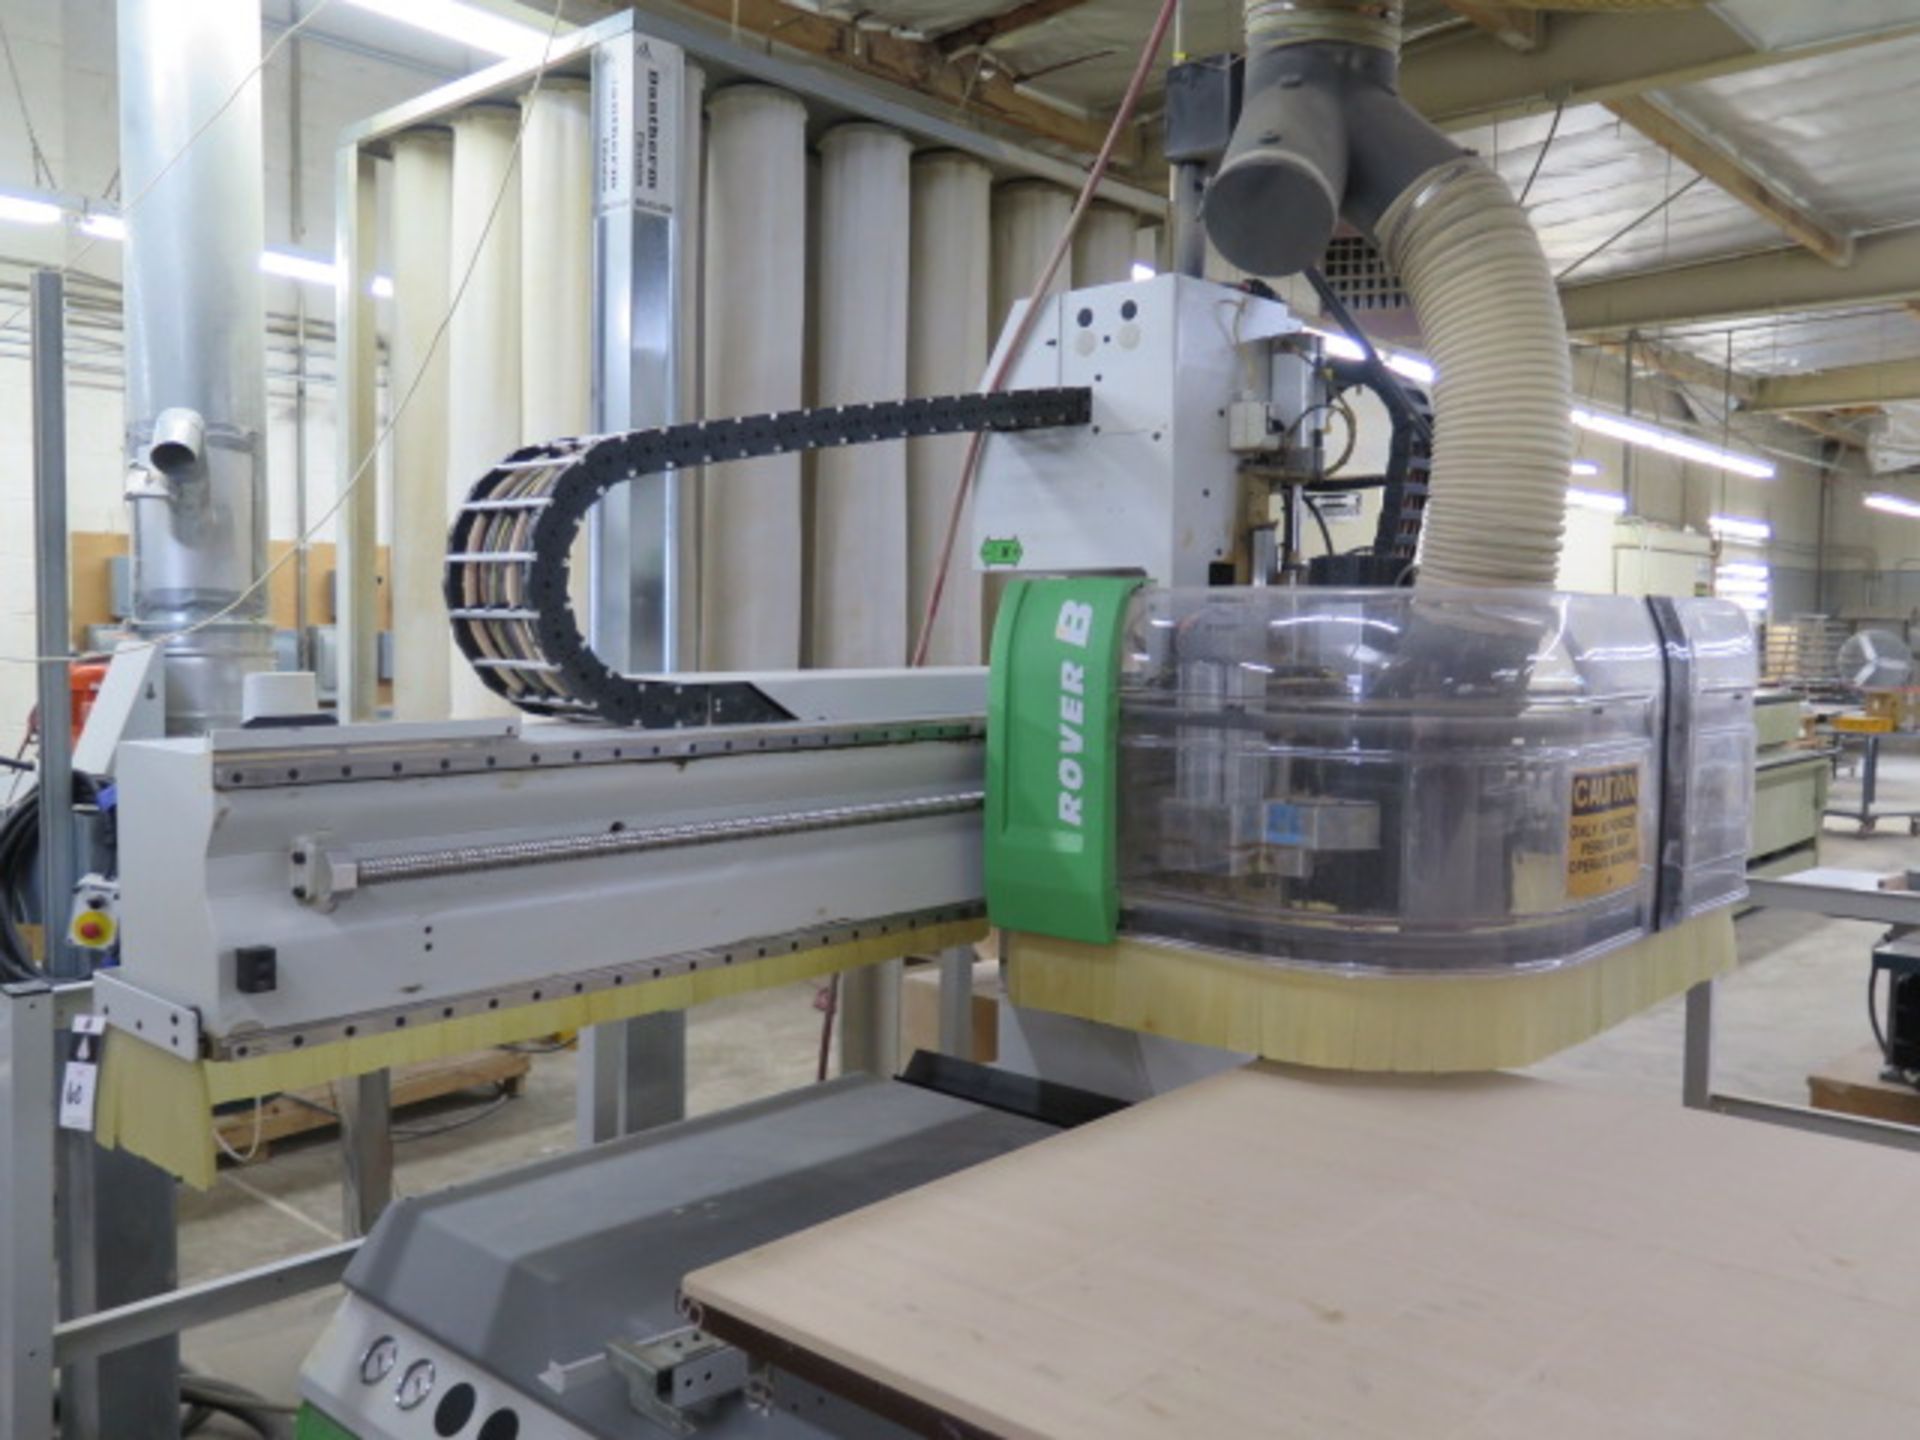 2006 Biesse Rover B4.40 FT-K 16-Spindle CNC Router s/n 59006 w/ Biesse CNC Controls, SOLD AS IS - Image 4 of 24